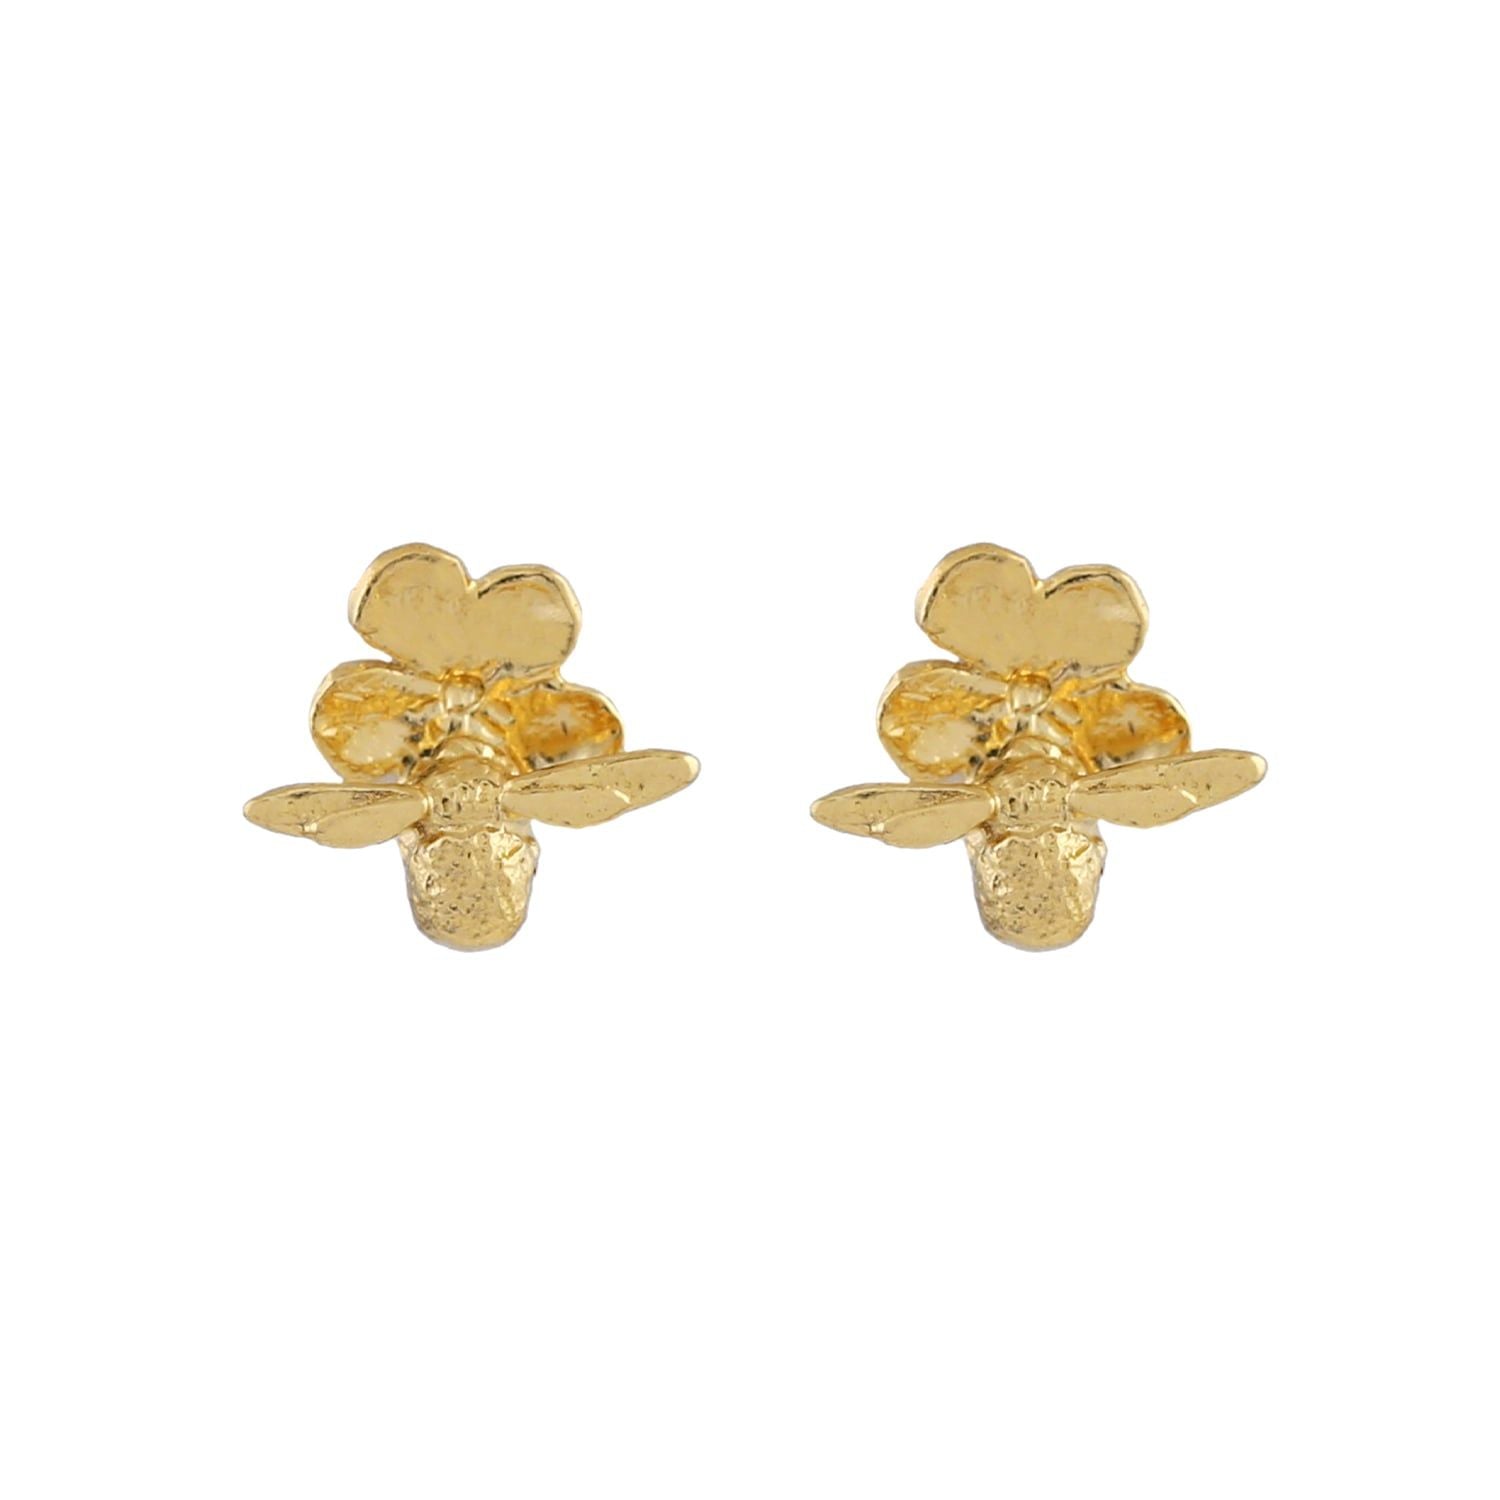 Forget Me Not Stud Earrings with Itsy Bitsy Bee Gold